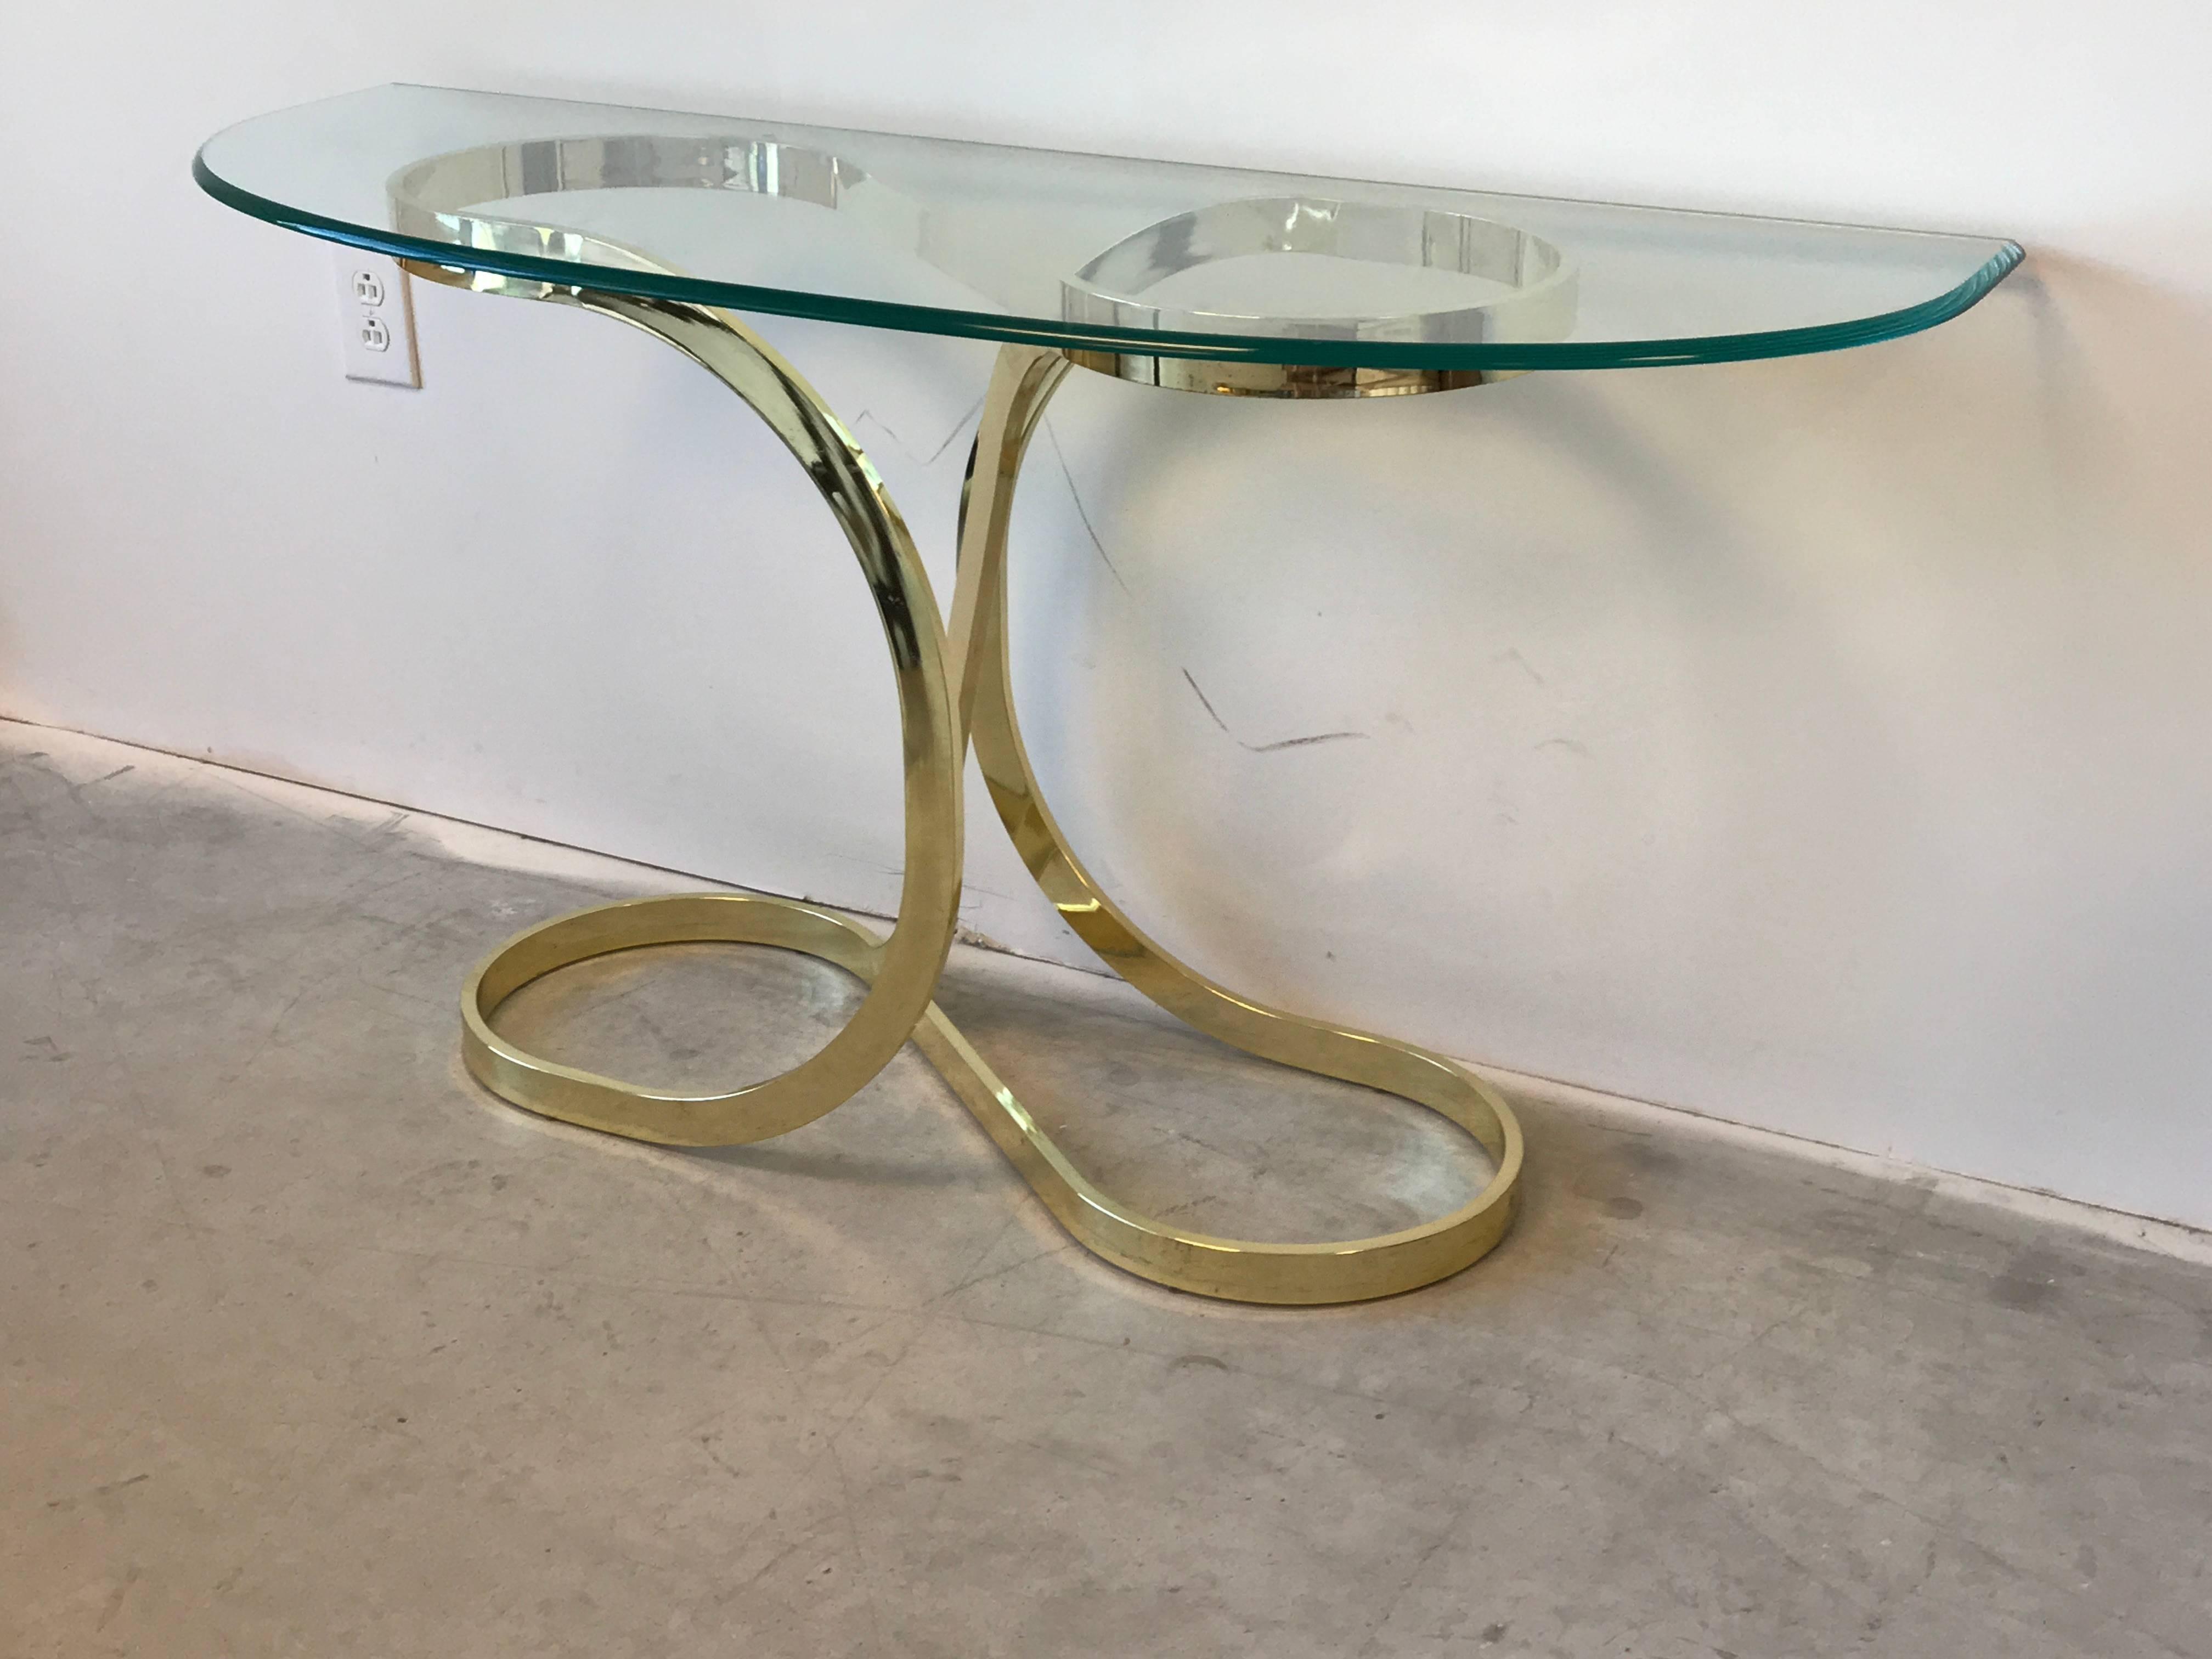 Offered is a gorgeous, 1970s Milo Baughman style brass ribbon console table with glass top. Minor age spots on brass, can be polished. Base can hold a minimum top of 33.5